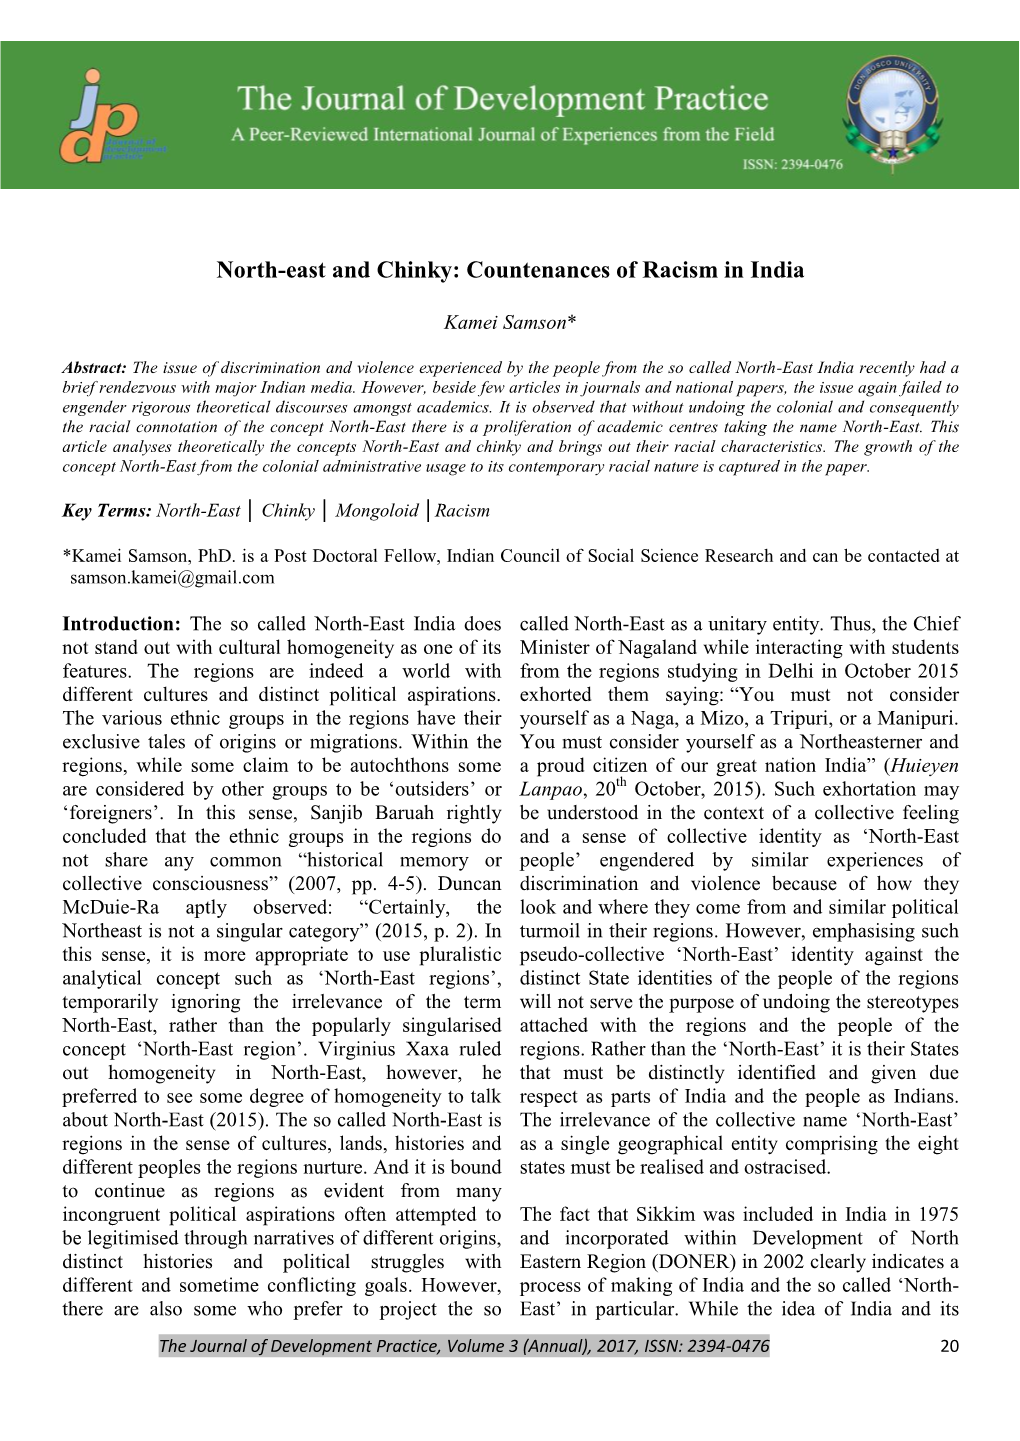 North-East and Chinky: Countenances of Racism in India